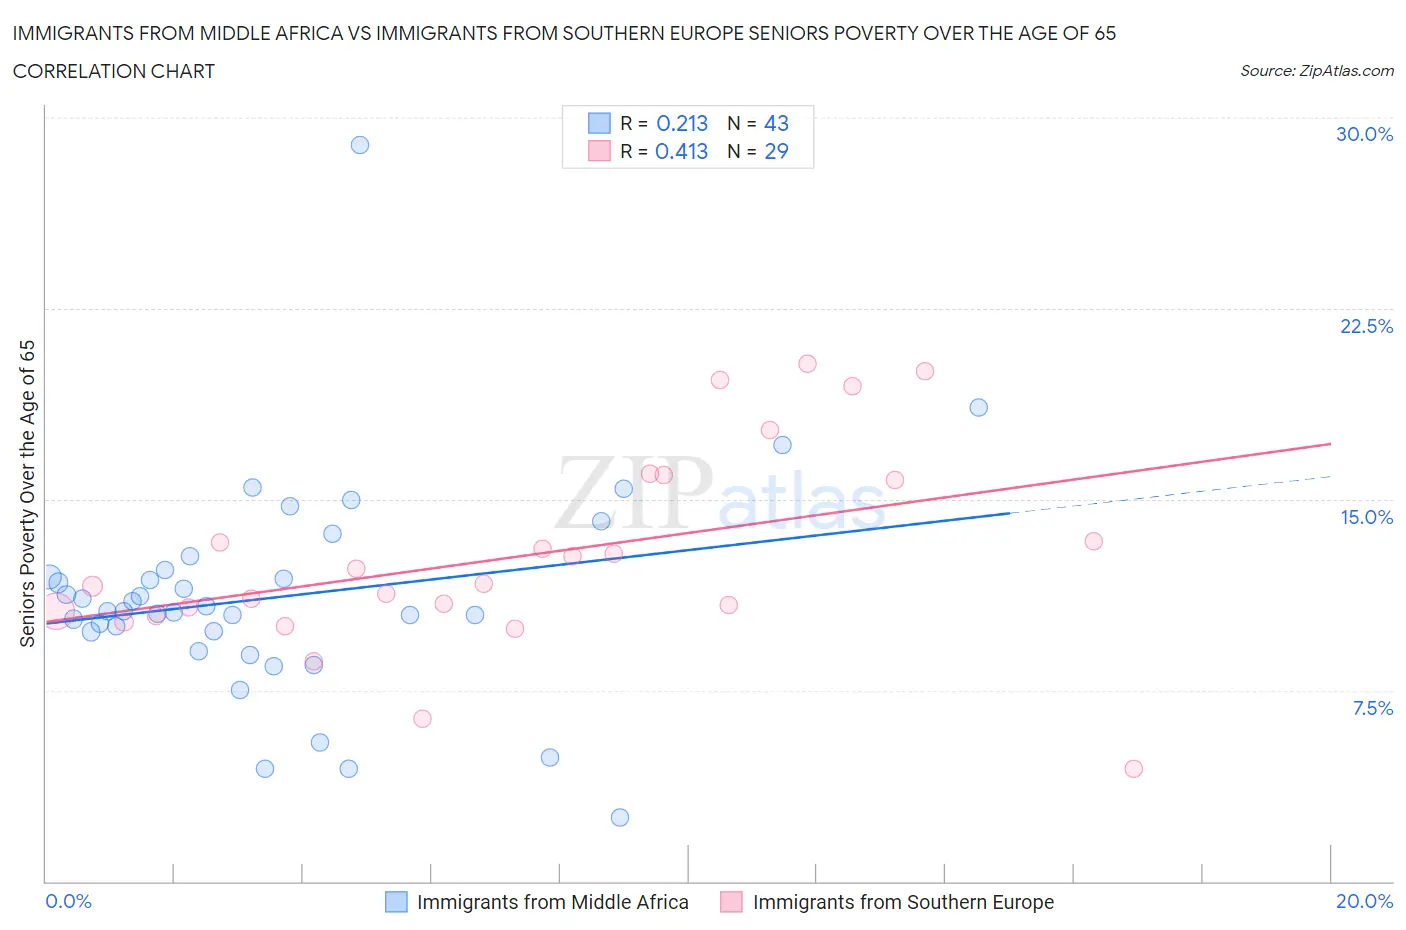 Immigrants from Middle Africa vs Immigrants from Southern Europe Seniors Poverty Over the Age of 65